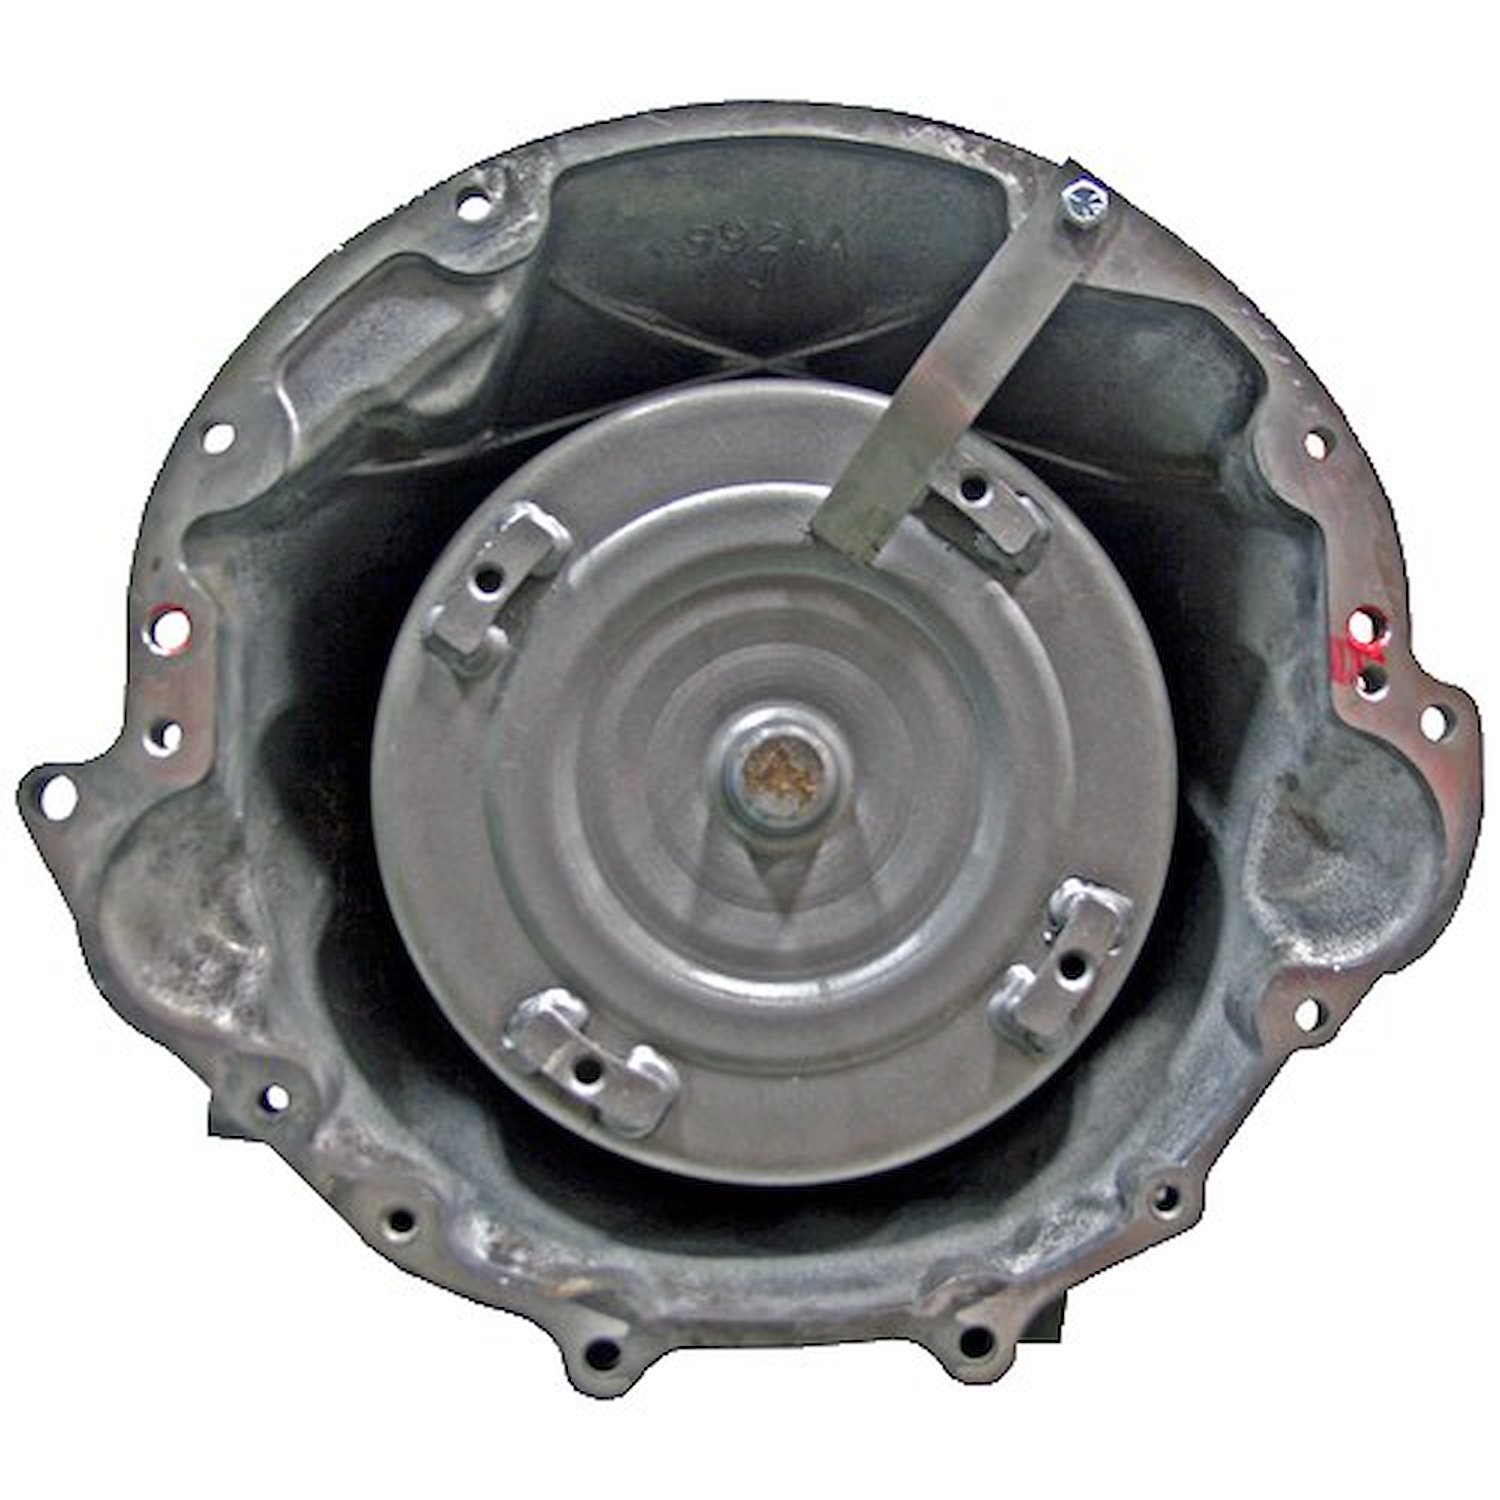 4R70W Reman Auto Trans Fits 1999-2000 Ford Mustang w/3.8L V6 Eng.